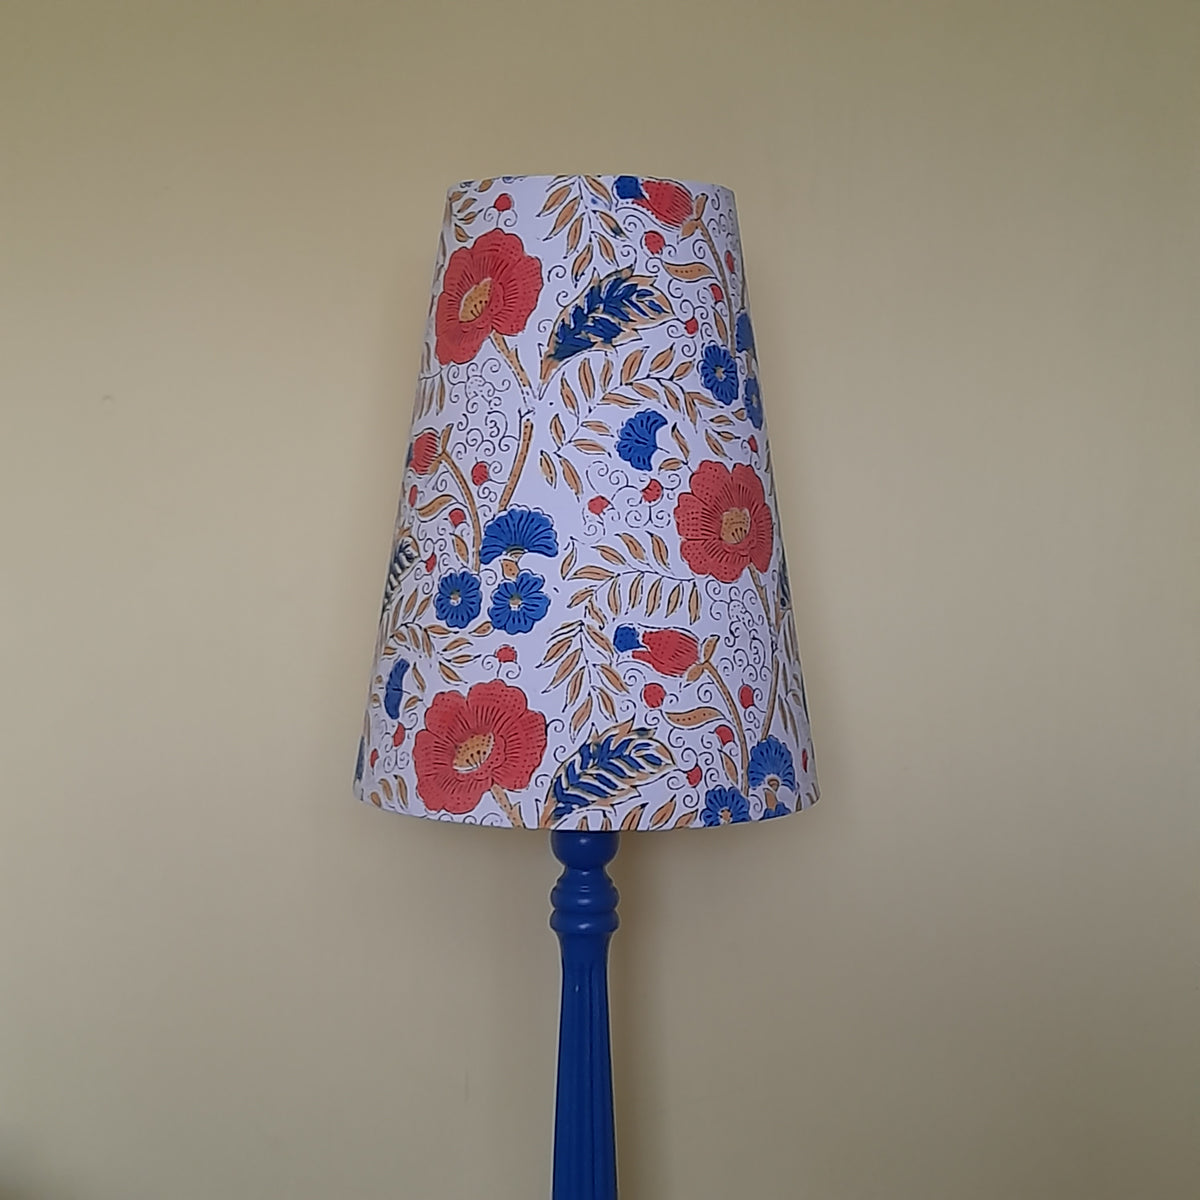 Drum Lampshade Making Evening Class Friday 1st March